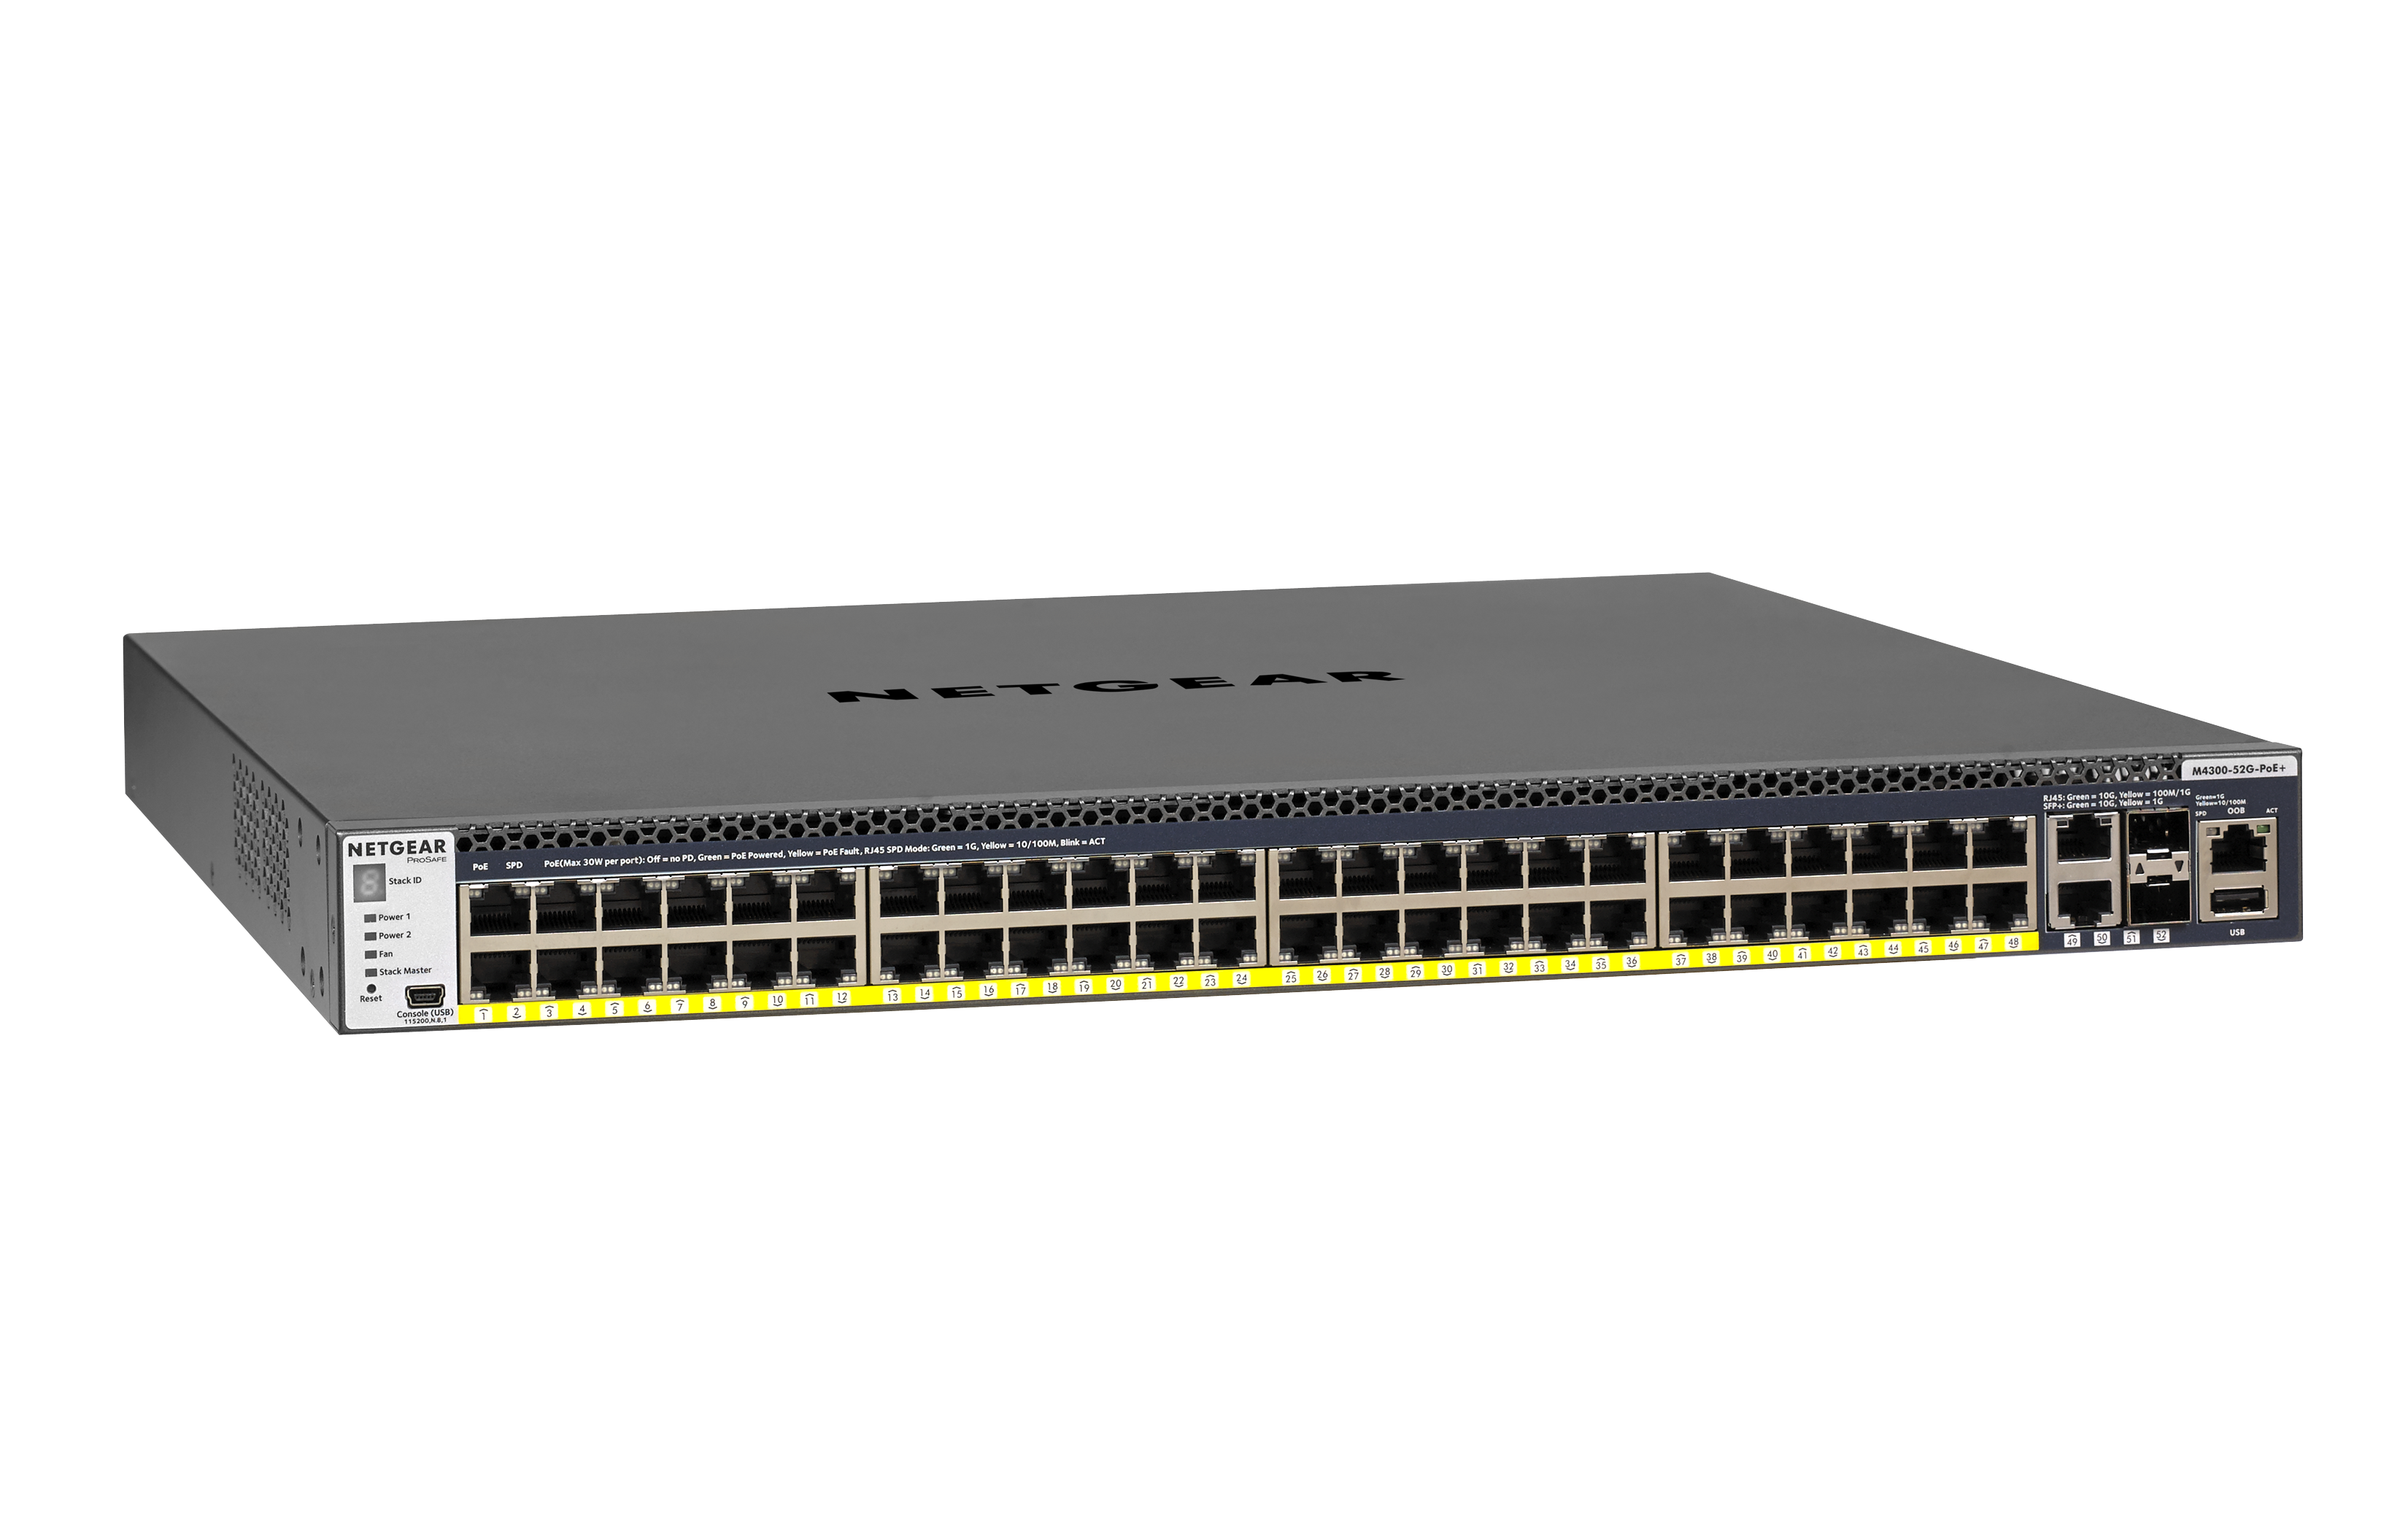 NETGEAR M4300-52G-PoE+ (1,000W PSU) Stackable Managed Switch (GSM4352PB) (GSM4352PB-100NES 606449112863 Networking Equipment Switches Gigabit Switches) photo